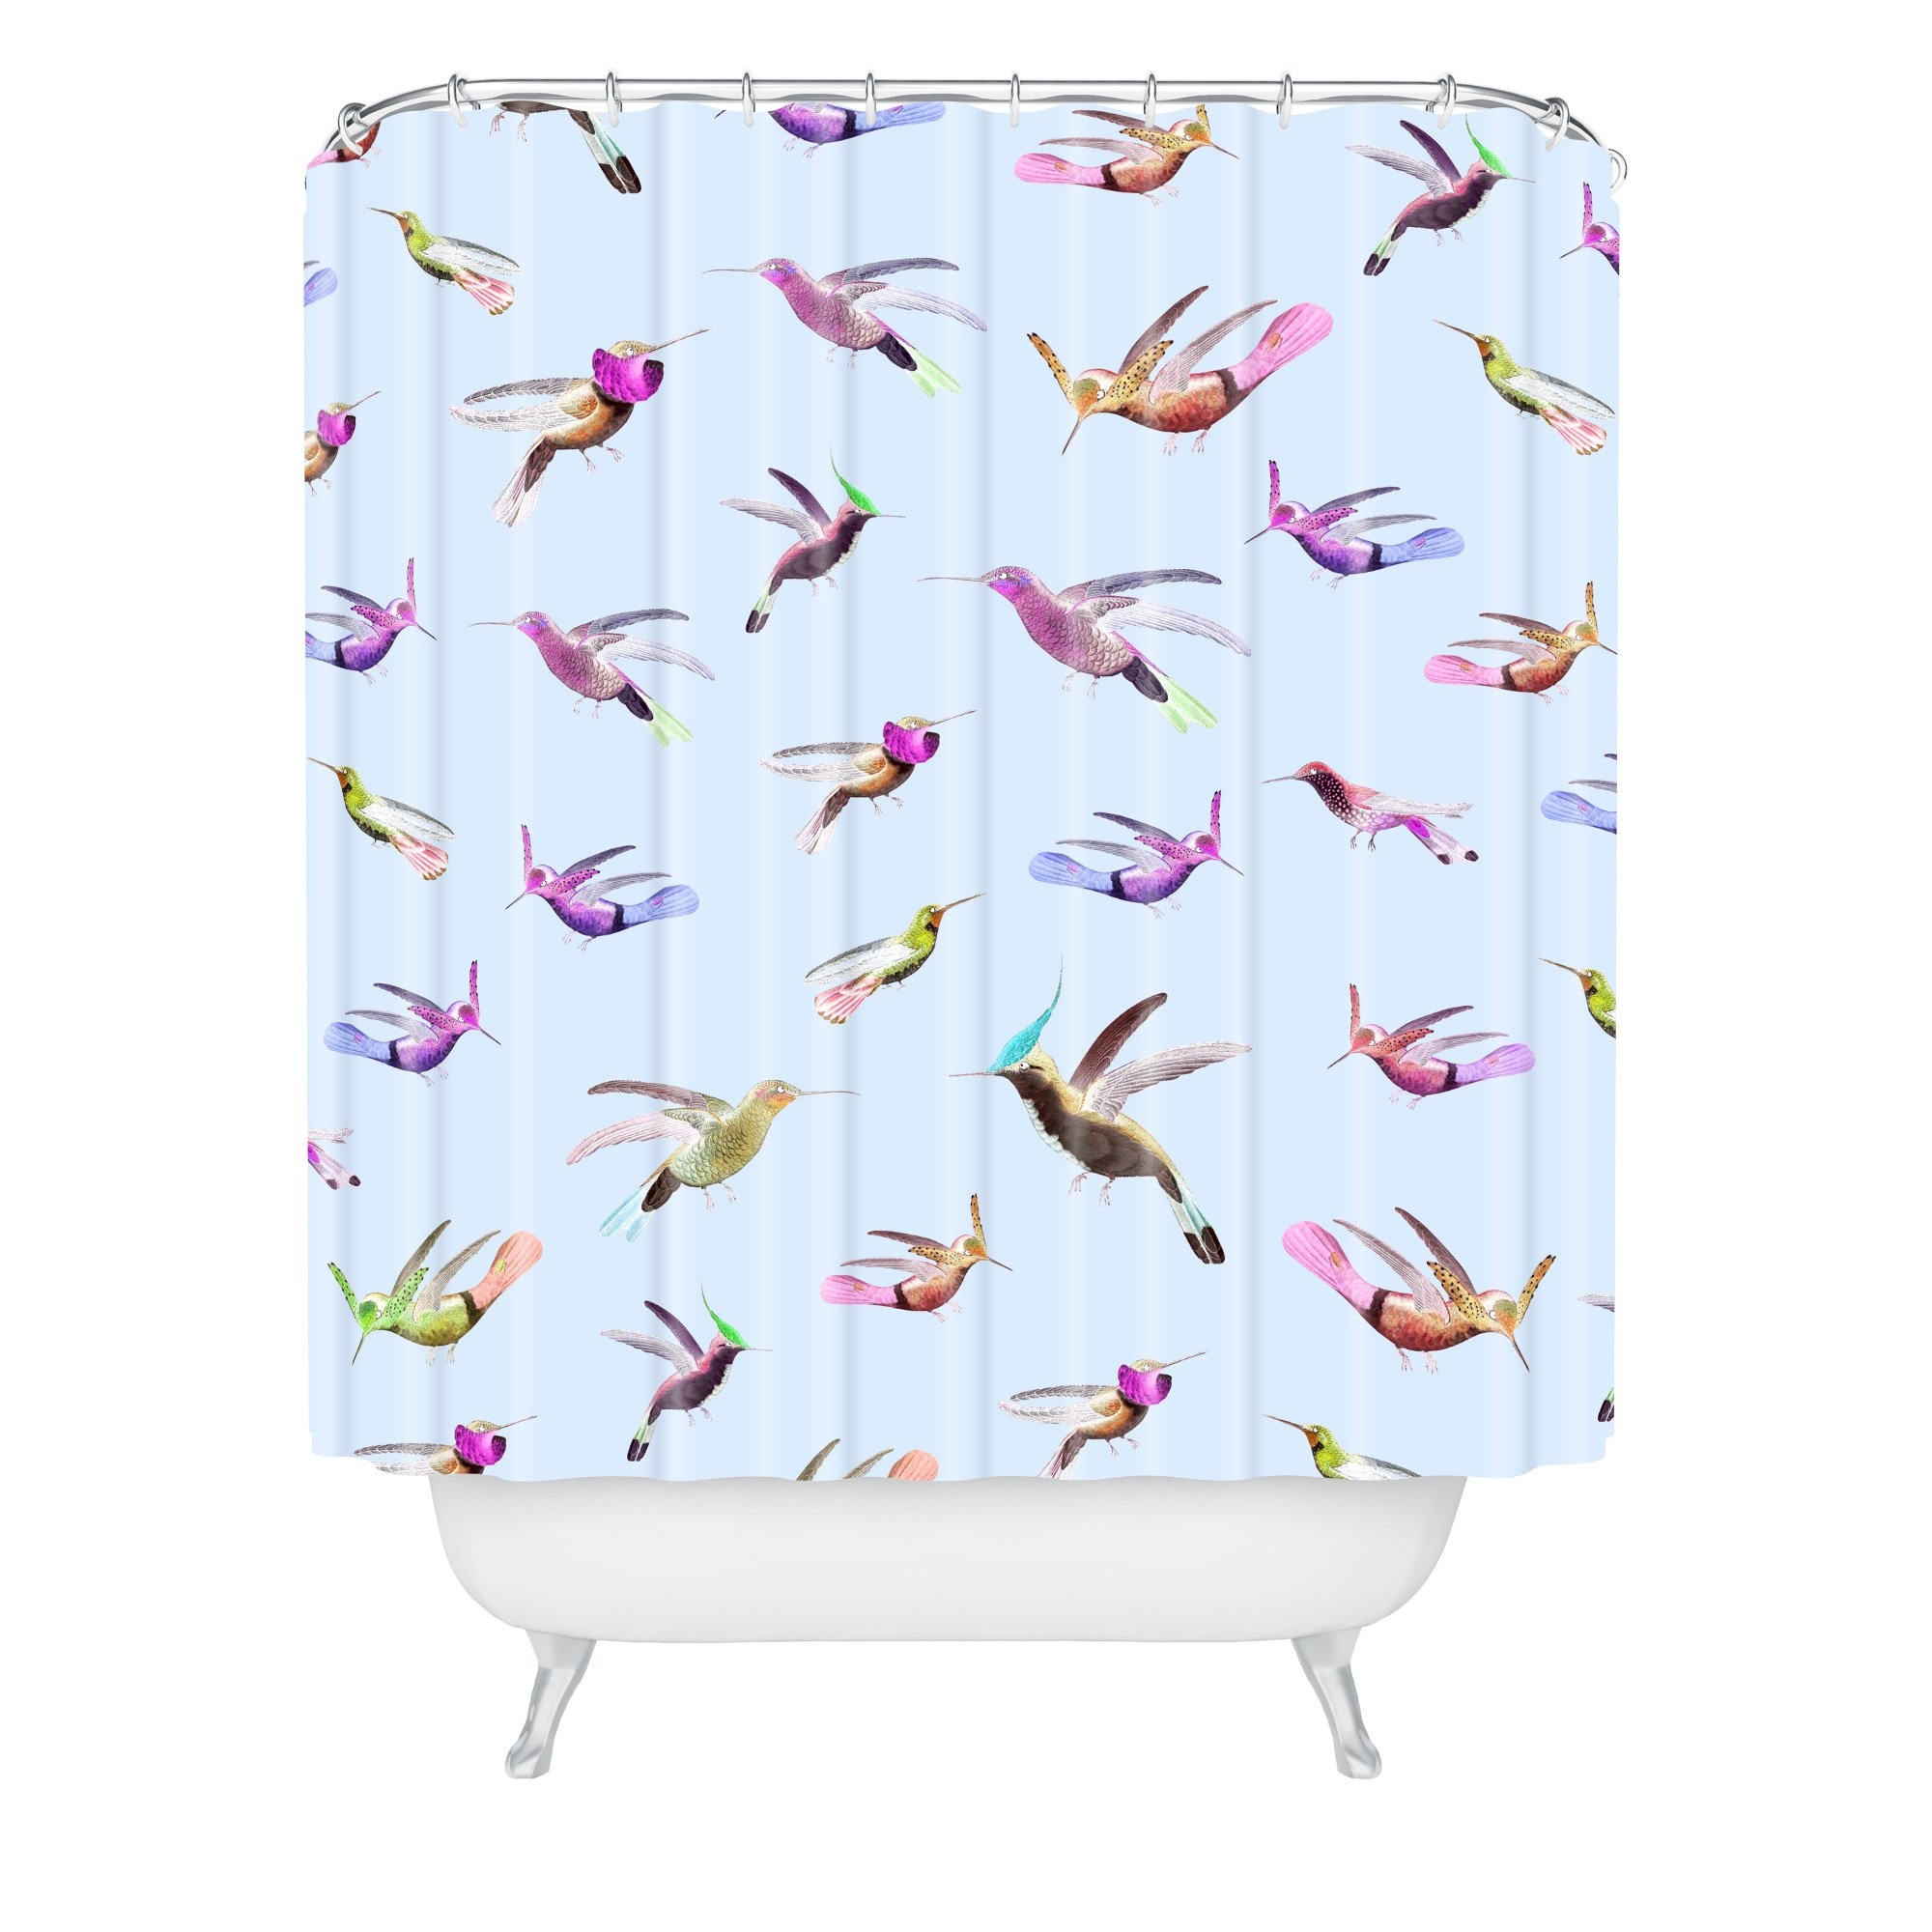 Iveta Abolina Colibri Garden Shower Curtain - Standard 71"x74" with Liner and Rings - Image 0